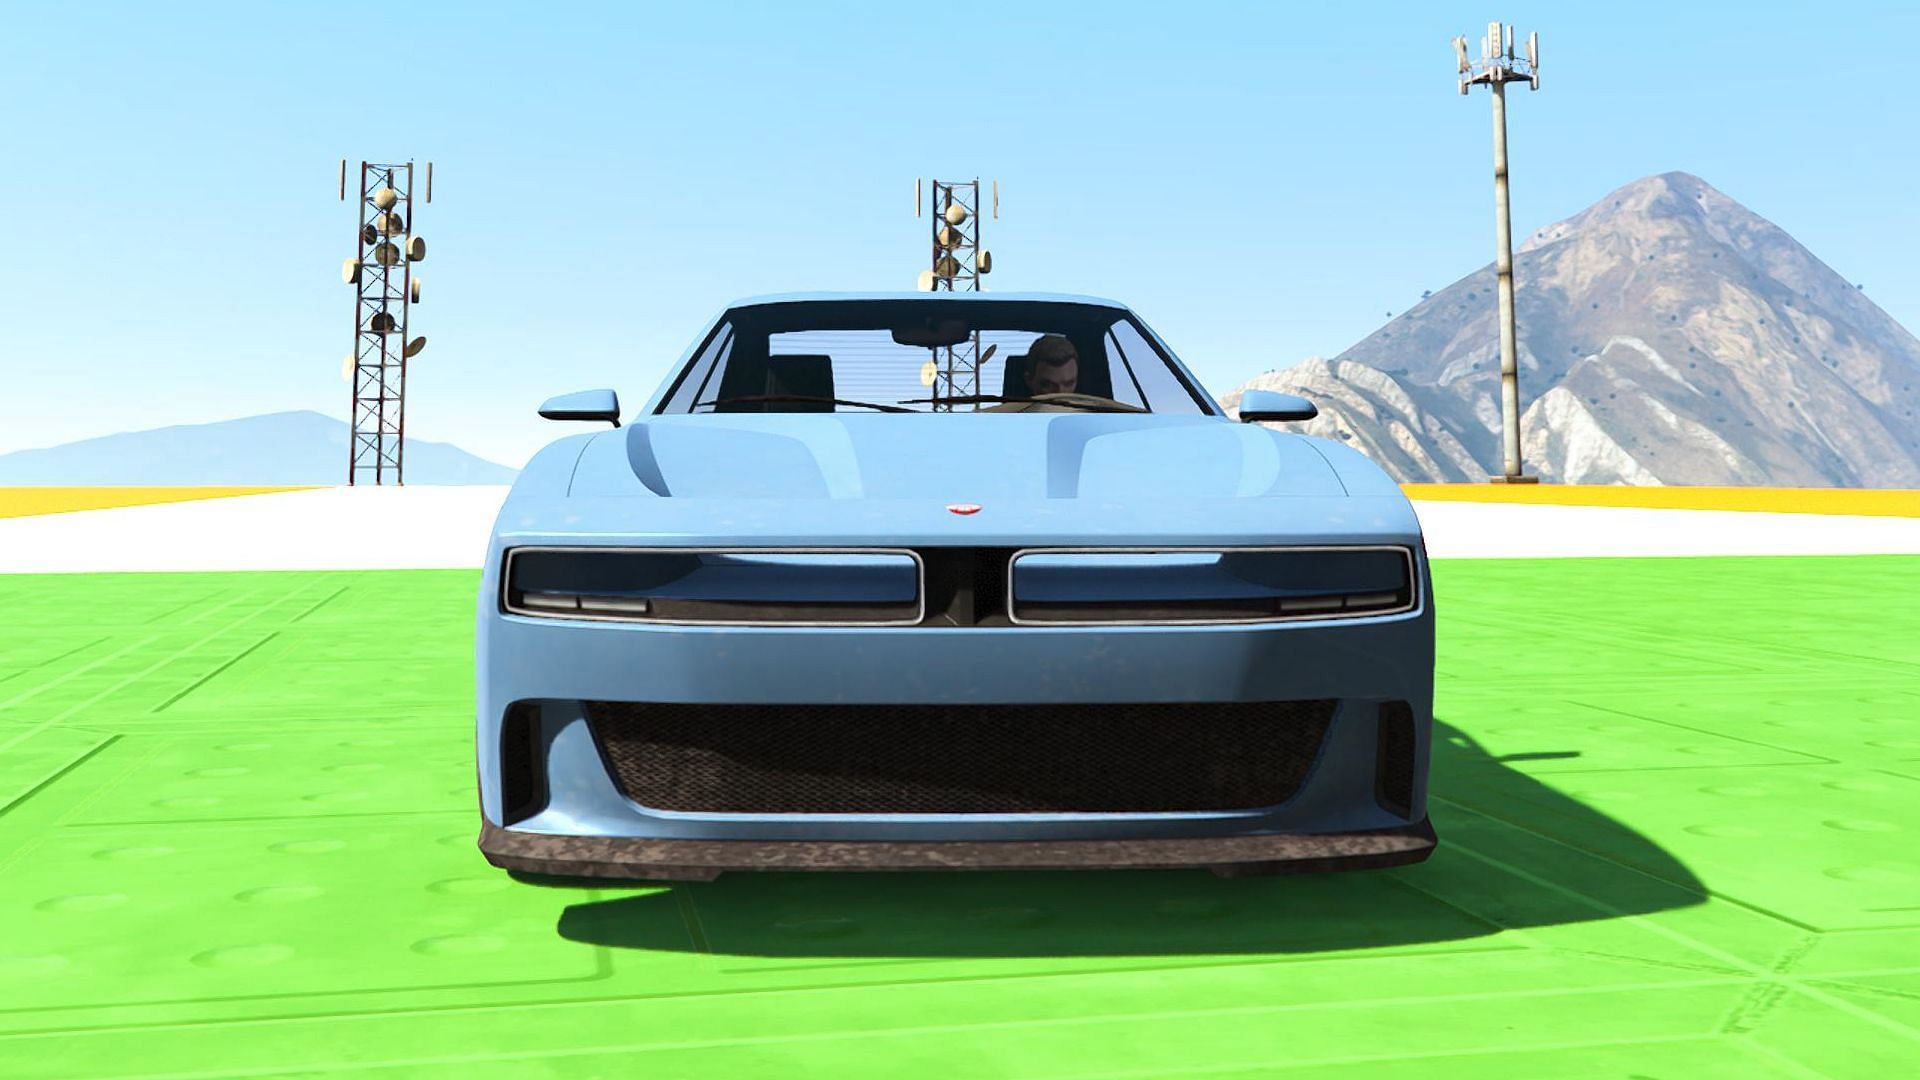 Another photo of the car (Image via Rockstar Games)